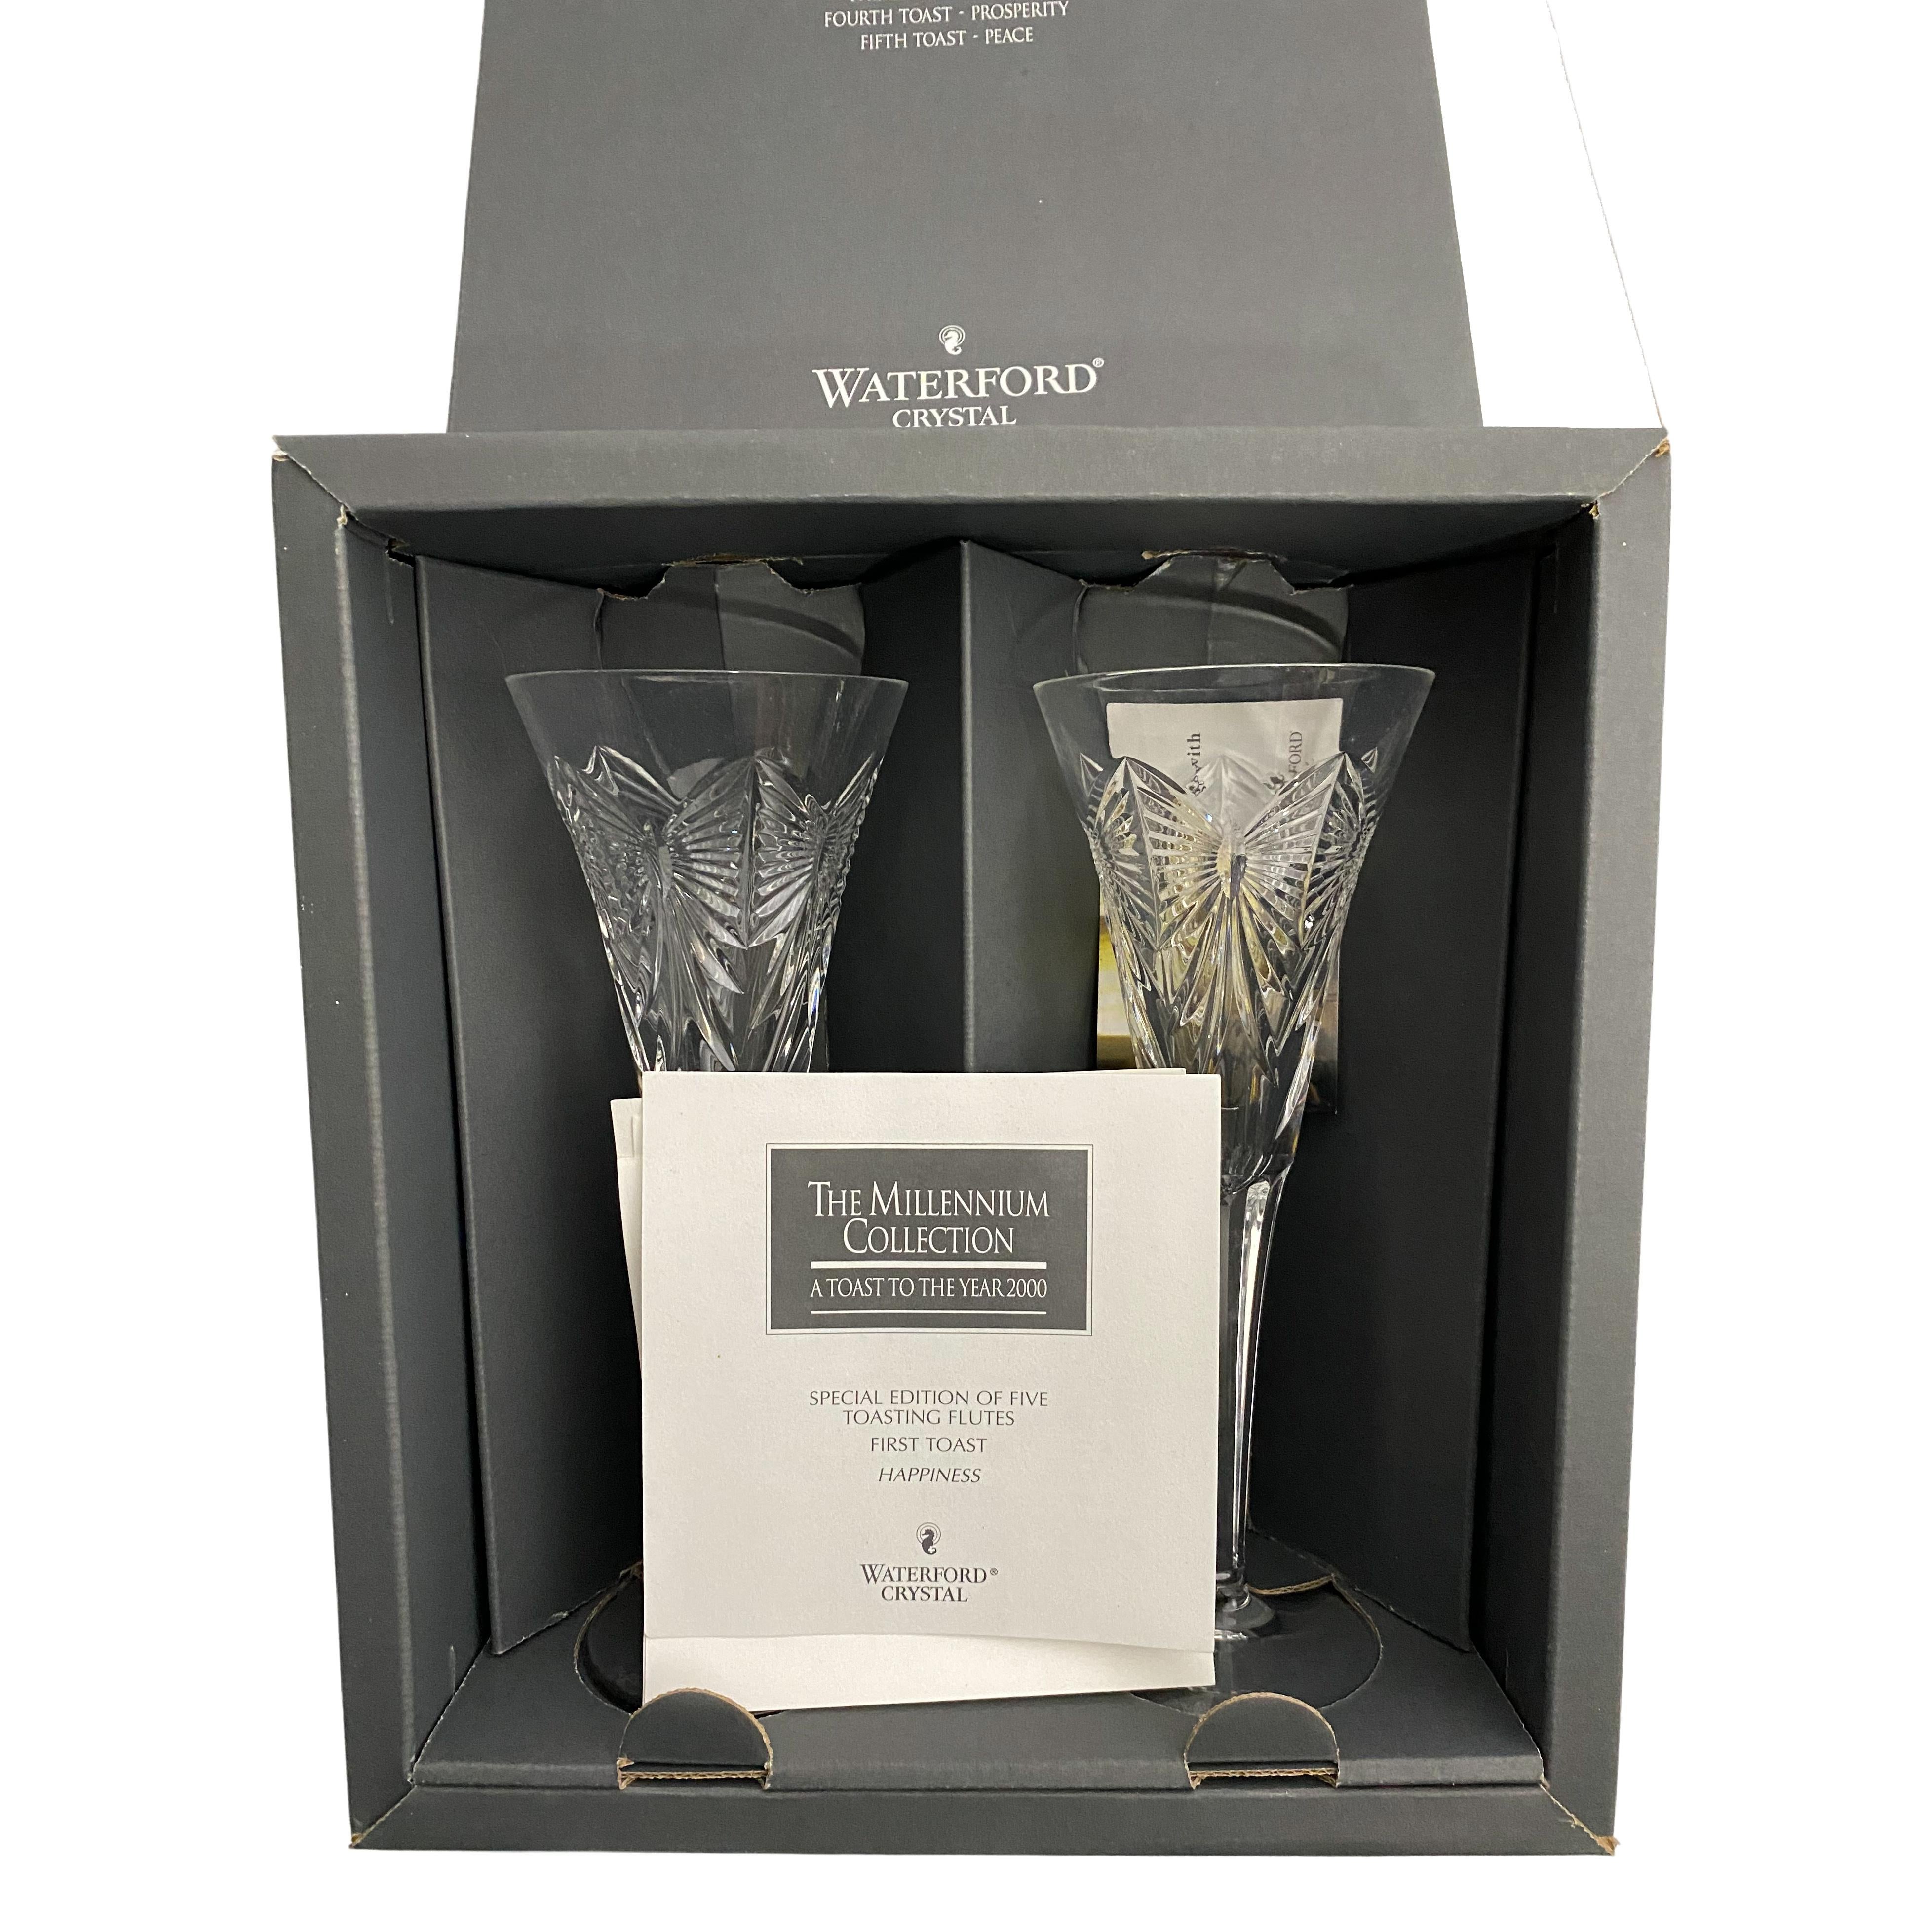 The Millennium Collection from Waterford.
Gorgeous crystal. Made in Germany.
We have all 5 varieties, 2 boxes of each. 
All NEW IN BOX, never used.  
Photos are taken from actual items.
HAPPINESS - LOVE - HEALTH - PROSPERITY - PEACE
Each set is